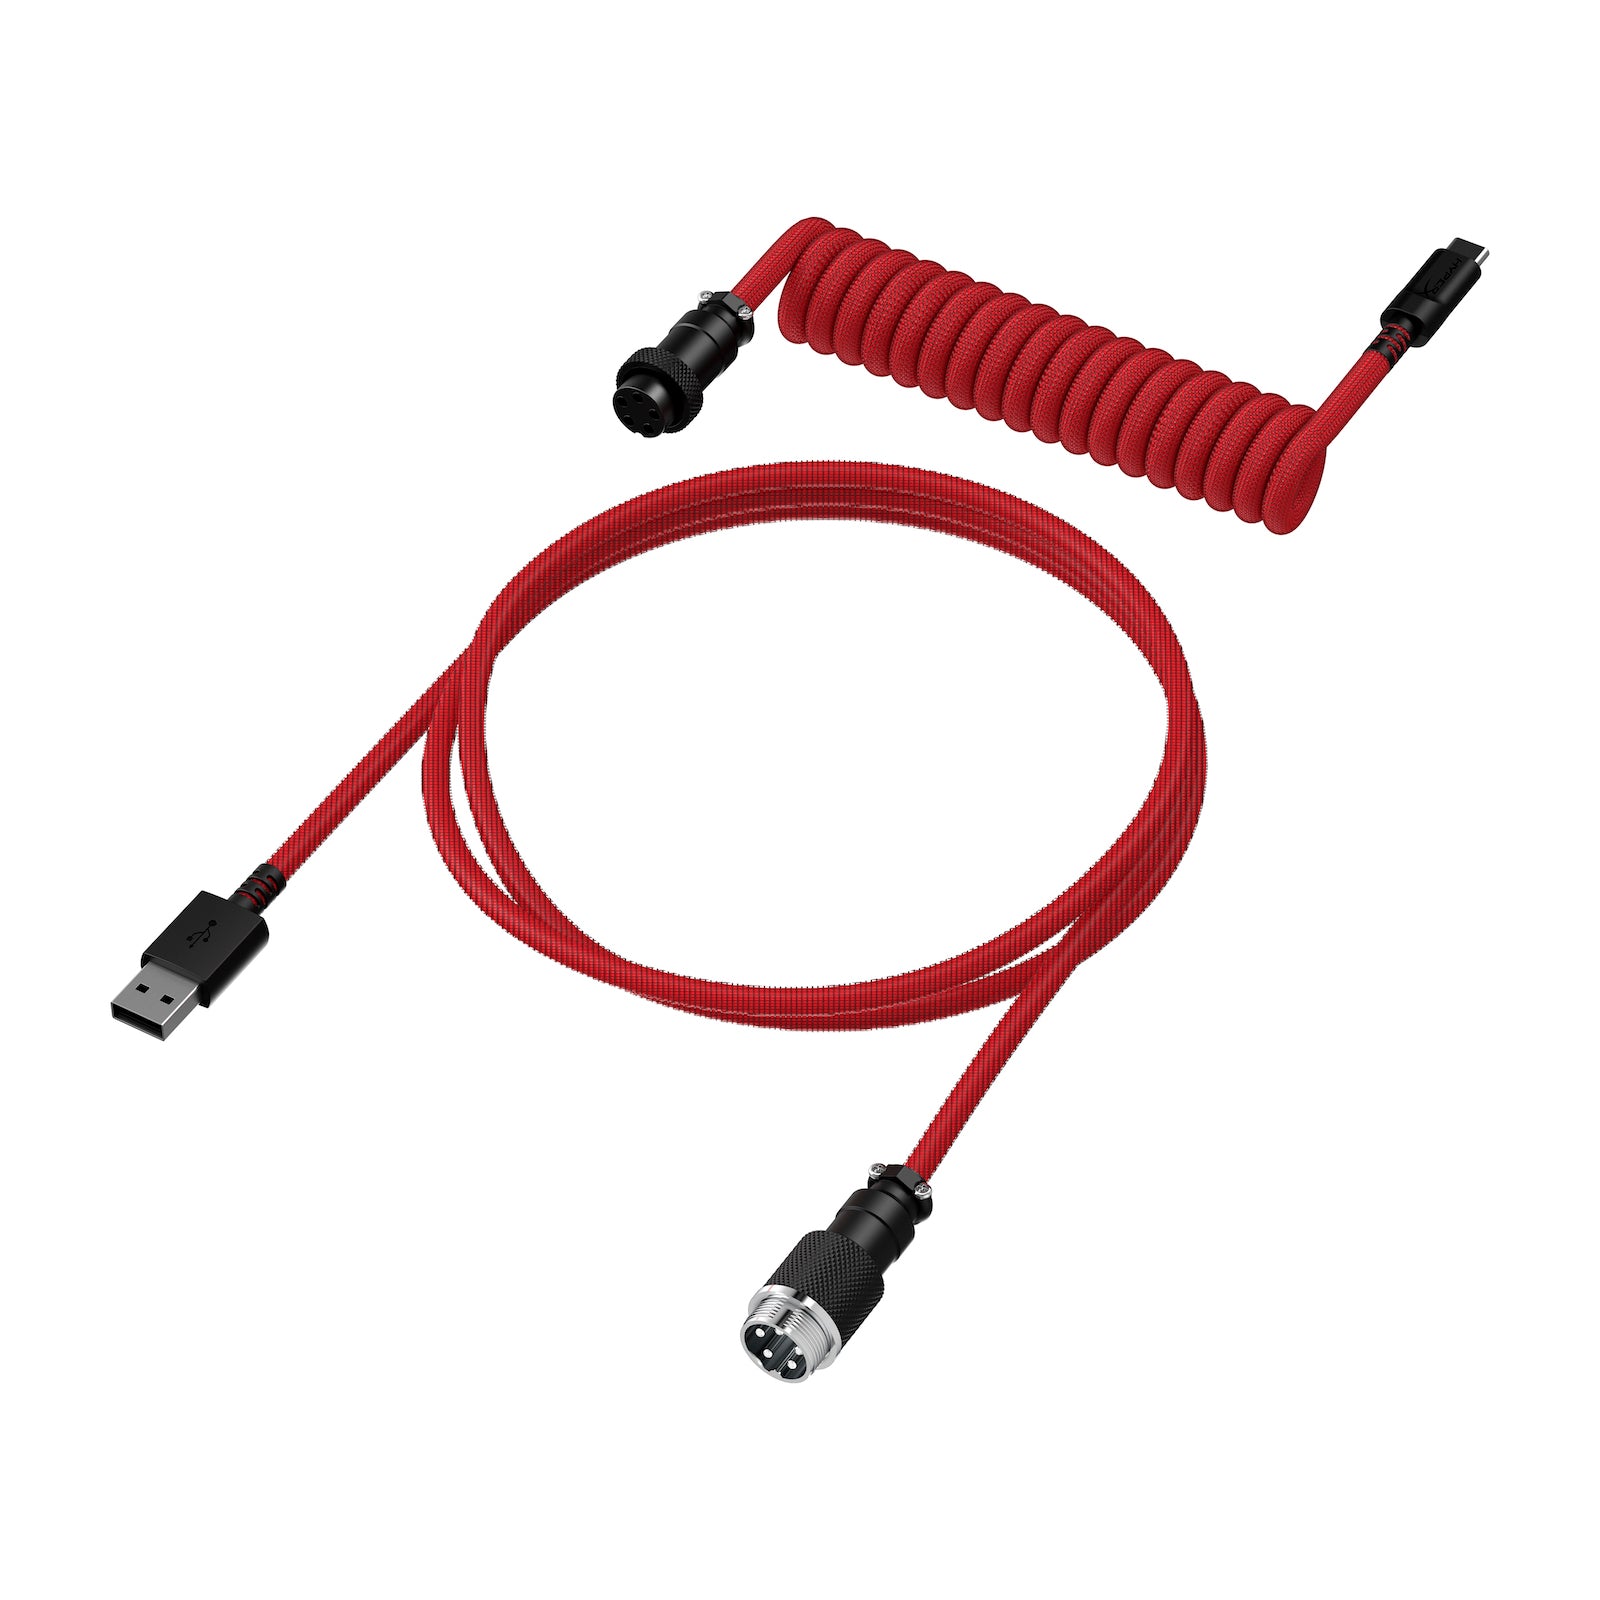 Angled view of HyperX Coiled Cable in Red and Black